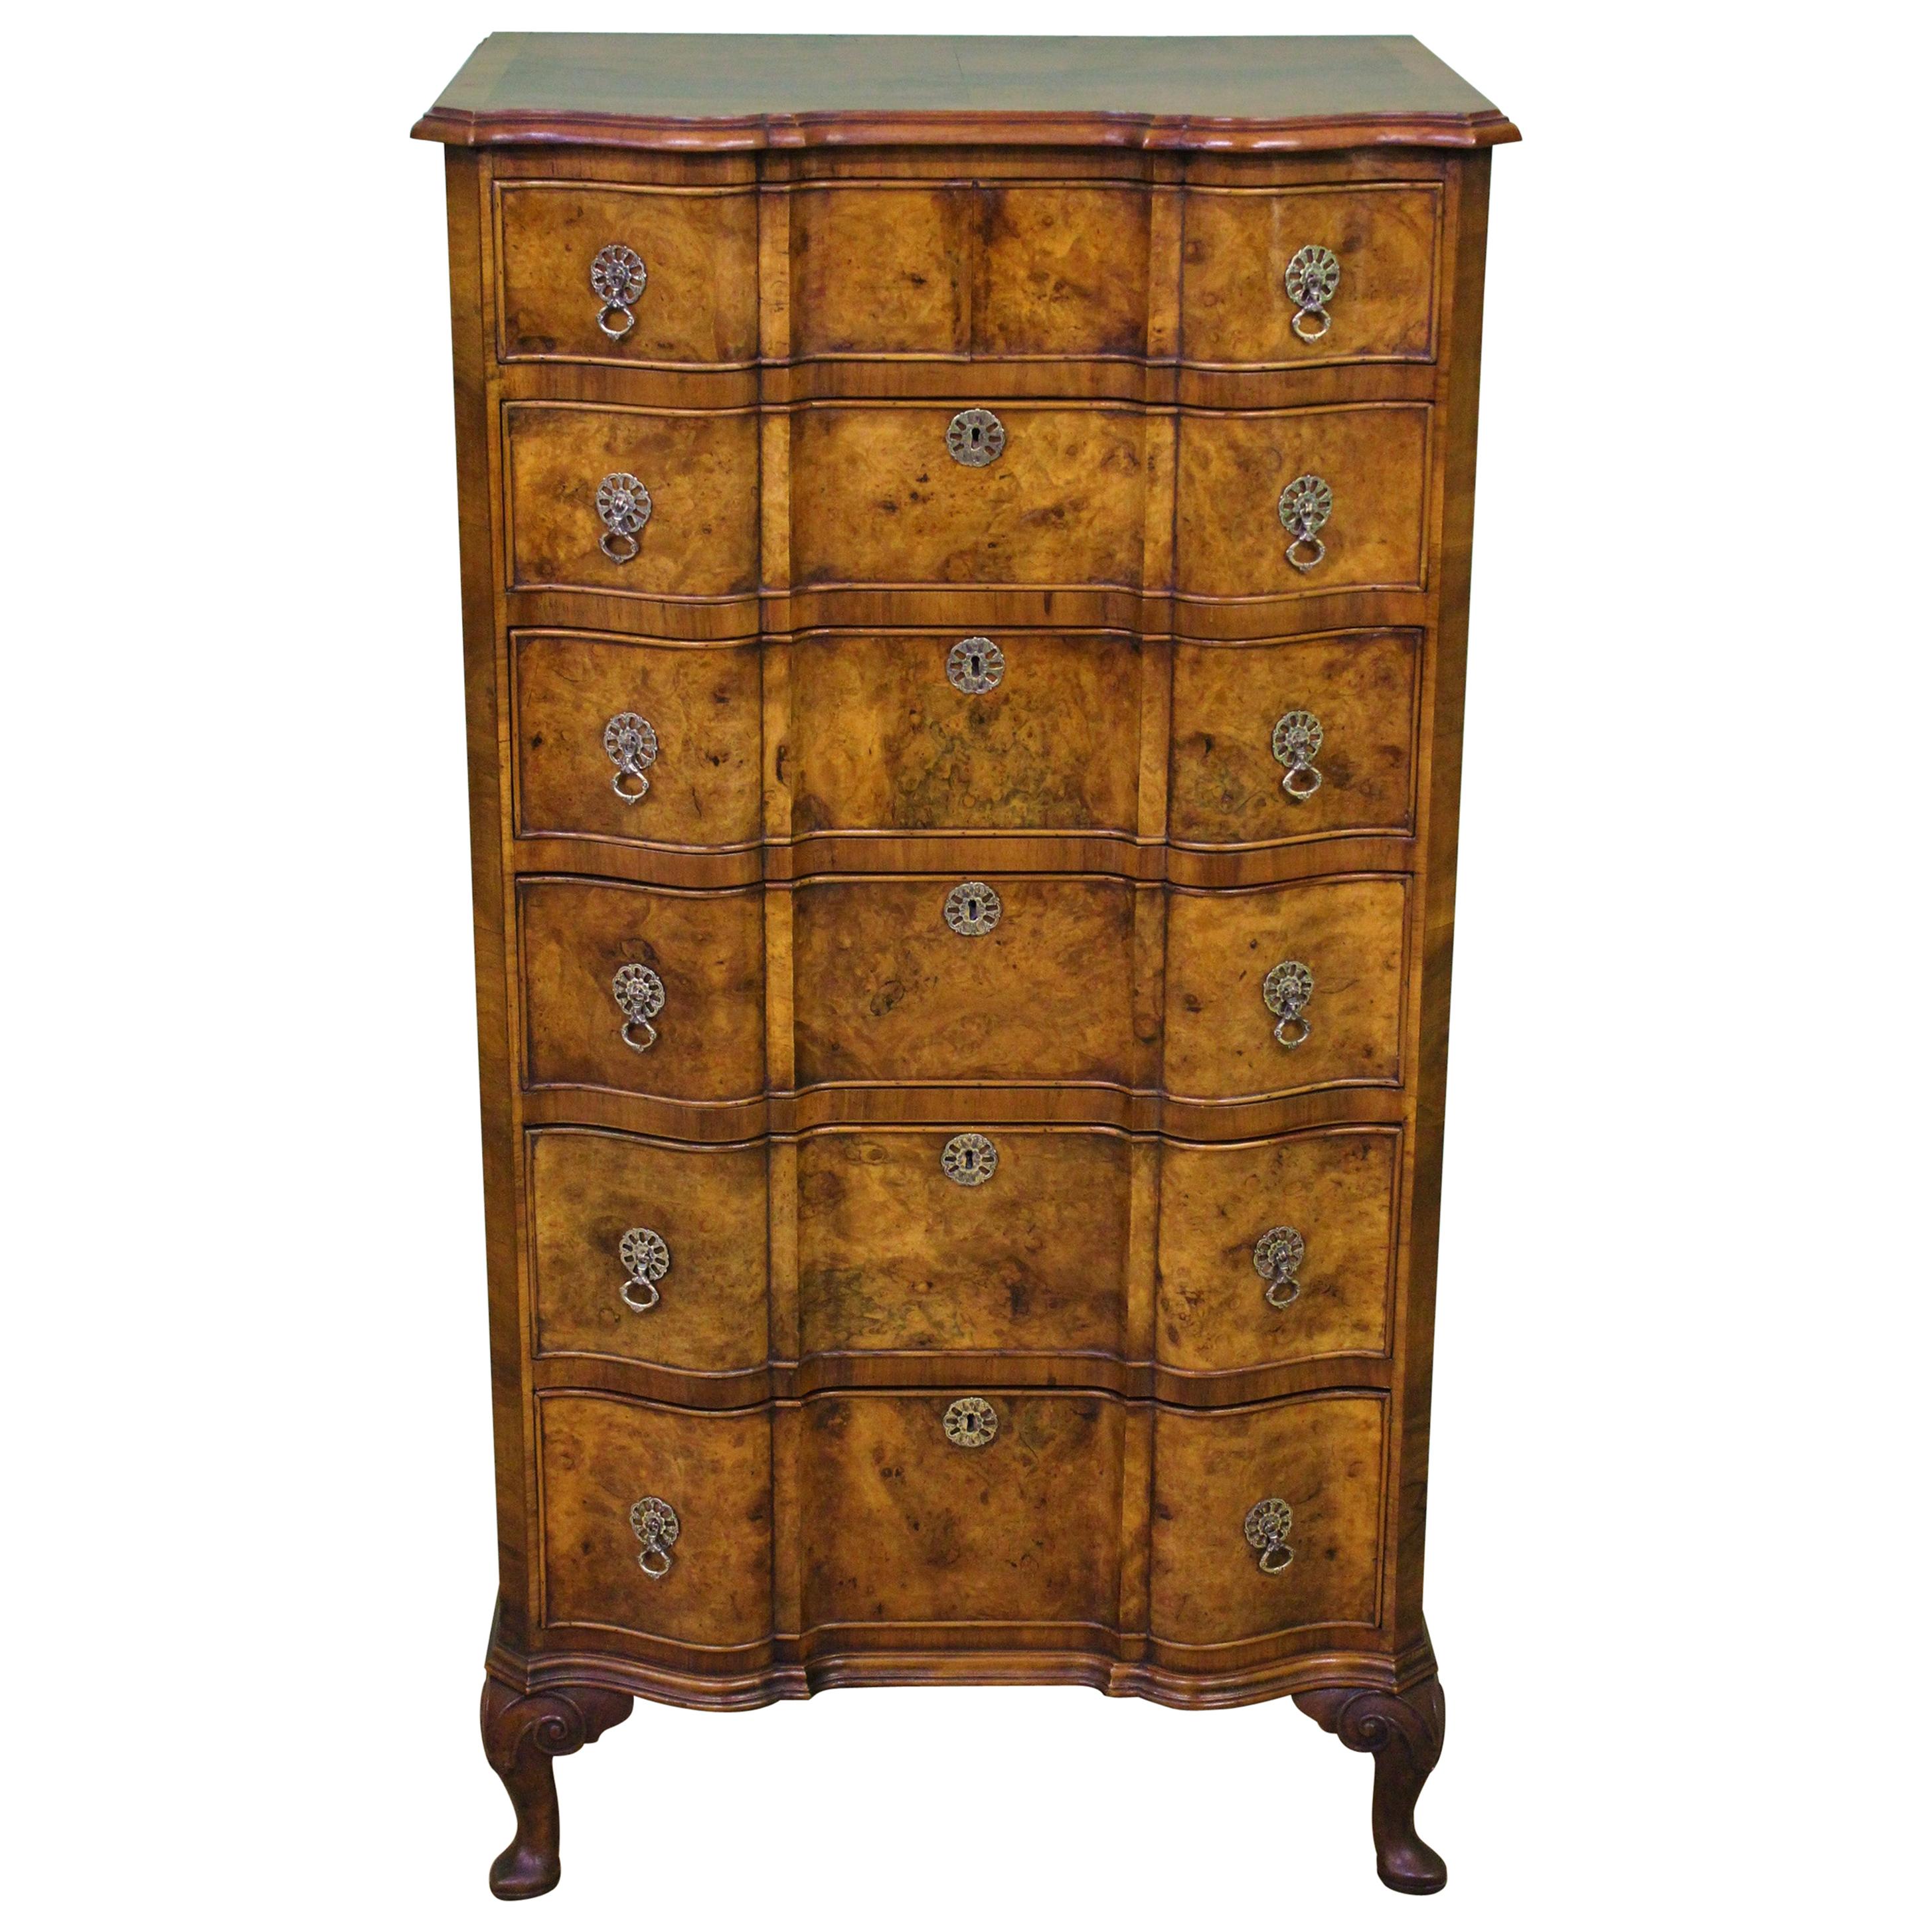 Tall Burr Walnut Serpentine Fronted Chest of Drawers